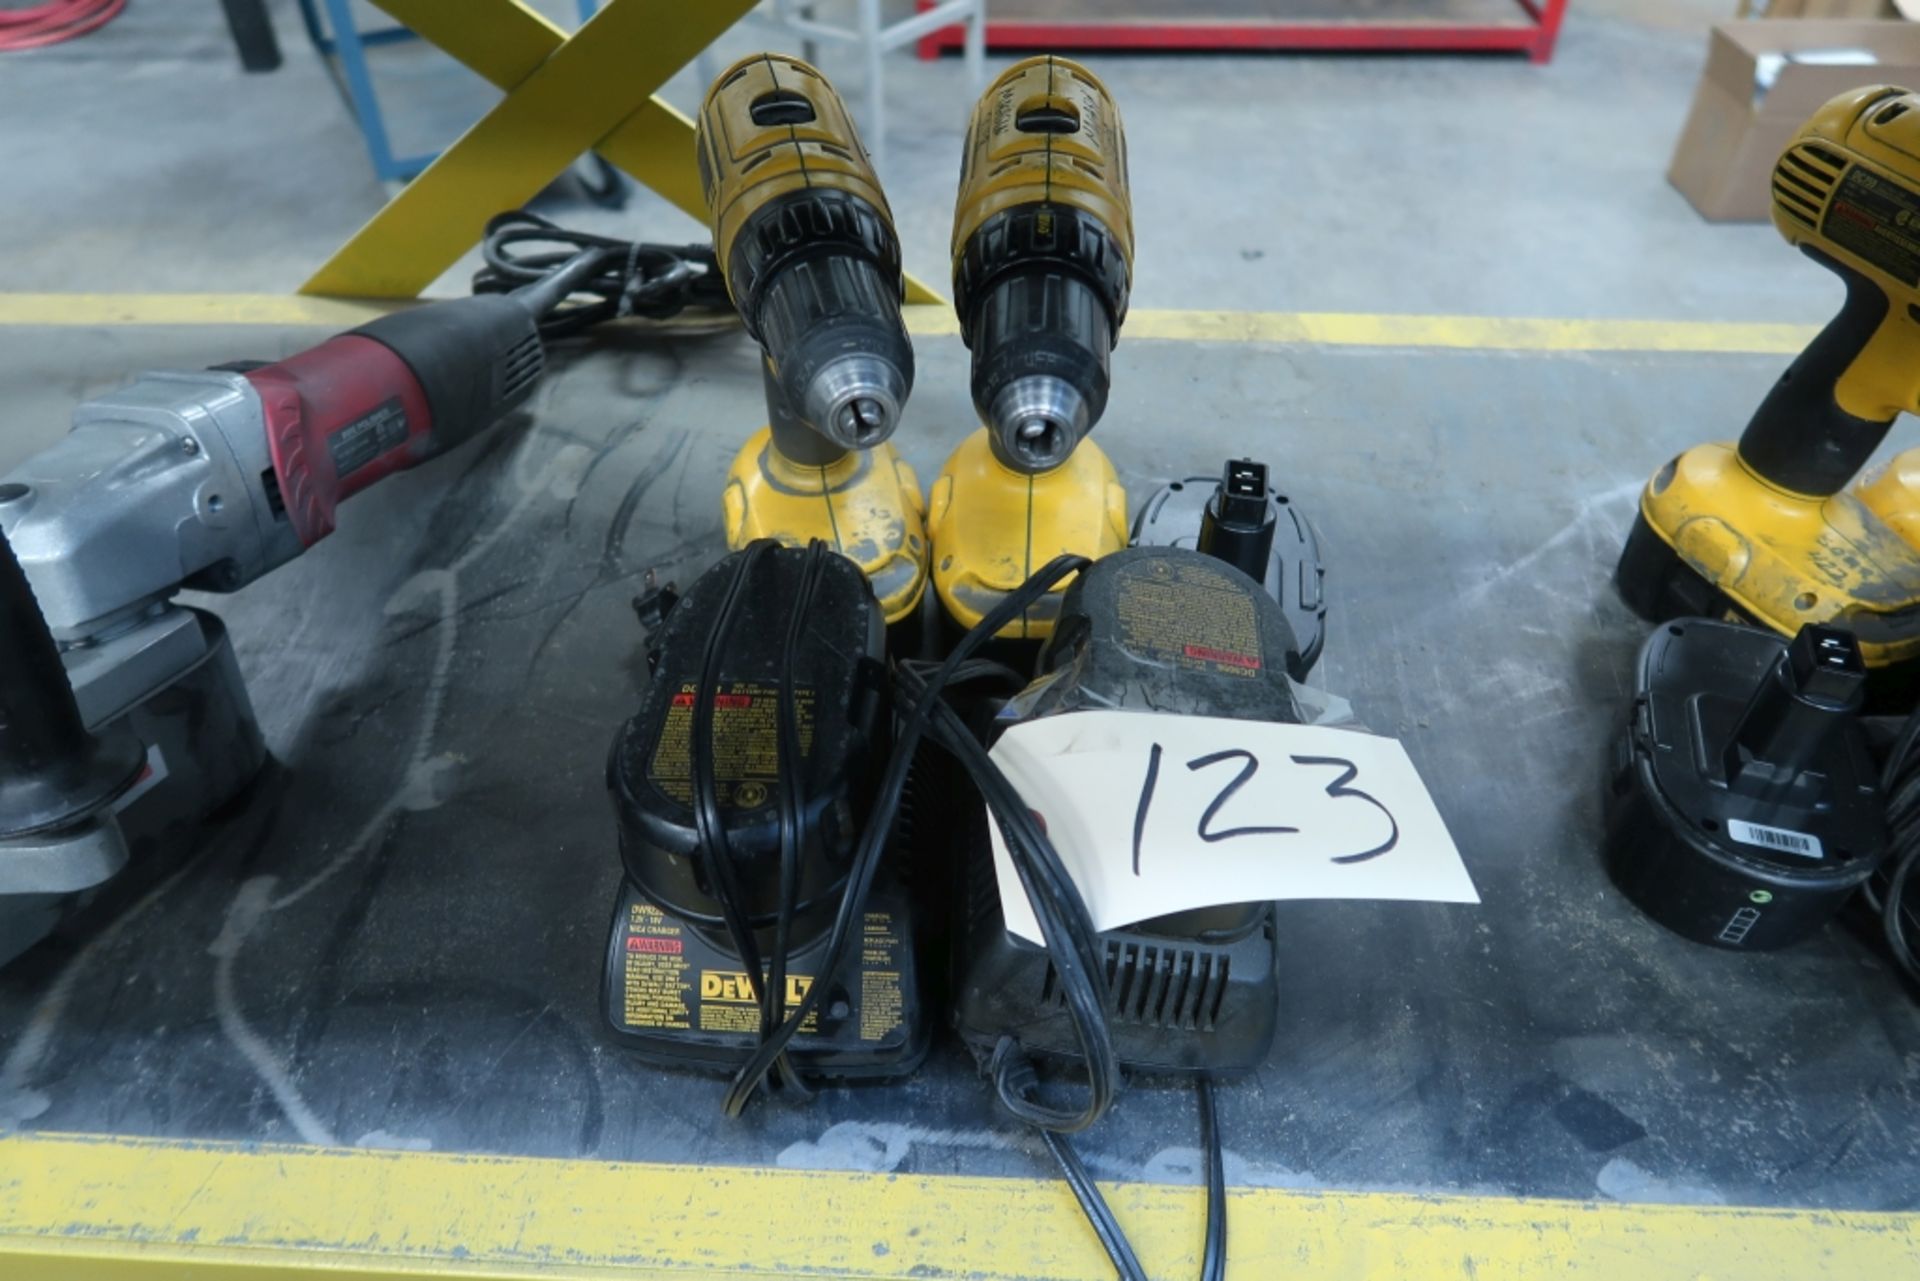 LOT OF 2 DEWALT DRILLS WITH 2 CHARGERS AND 3 EXTRA BATTERIES